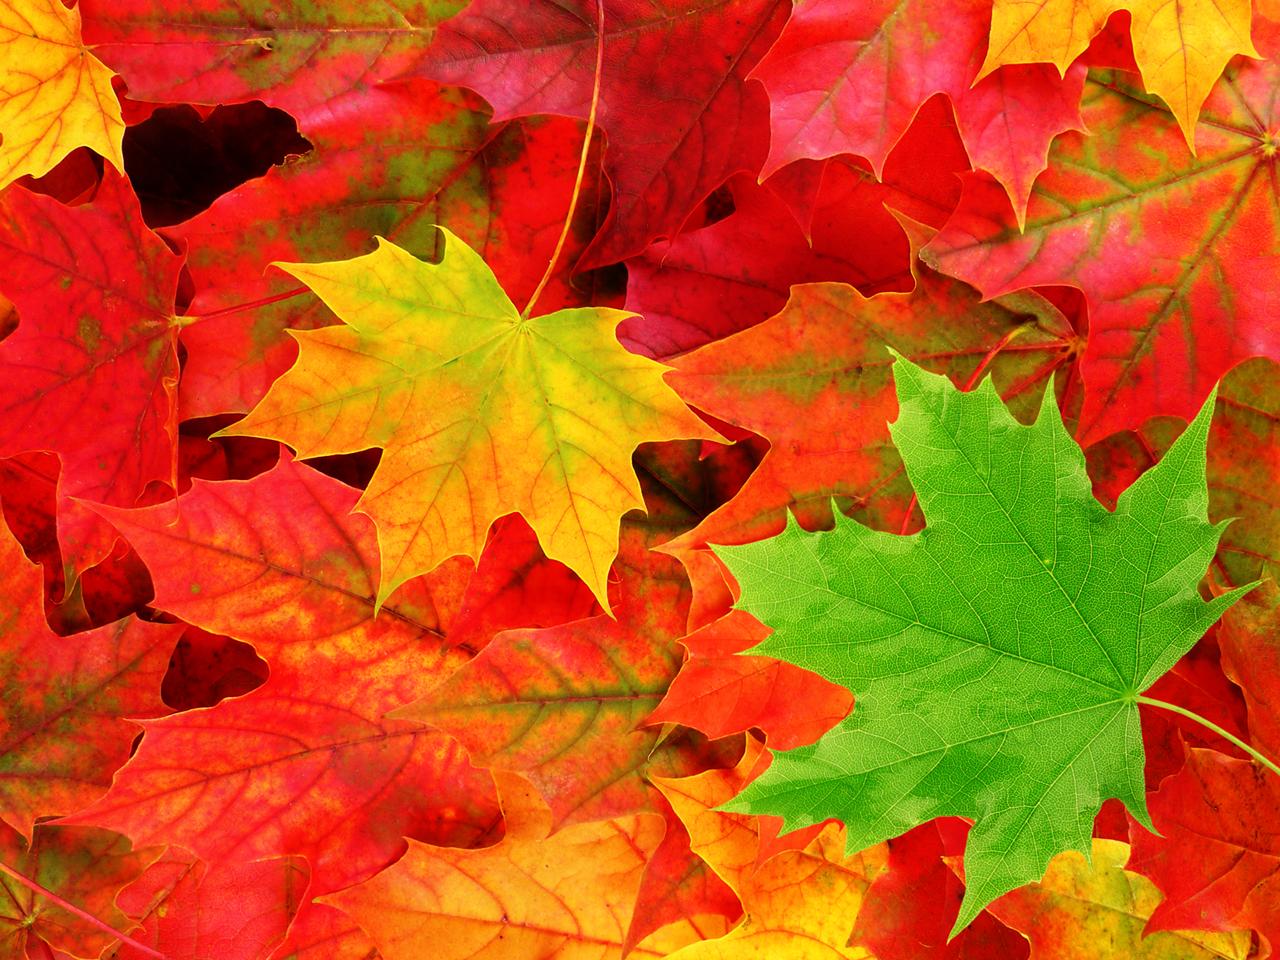 View And Download Autumn Leaves Wallpapers